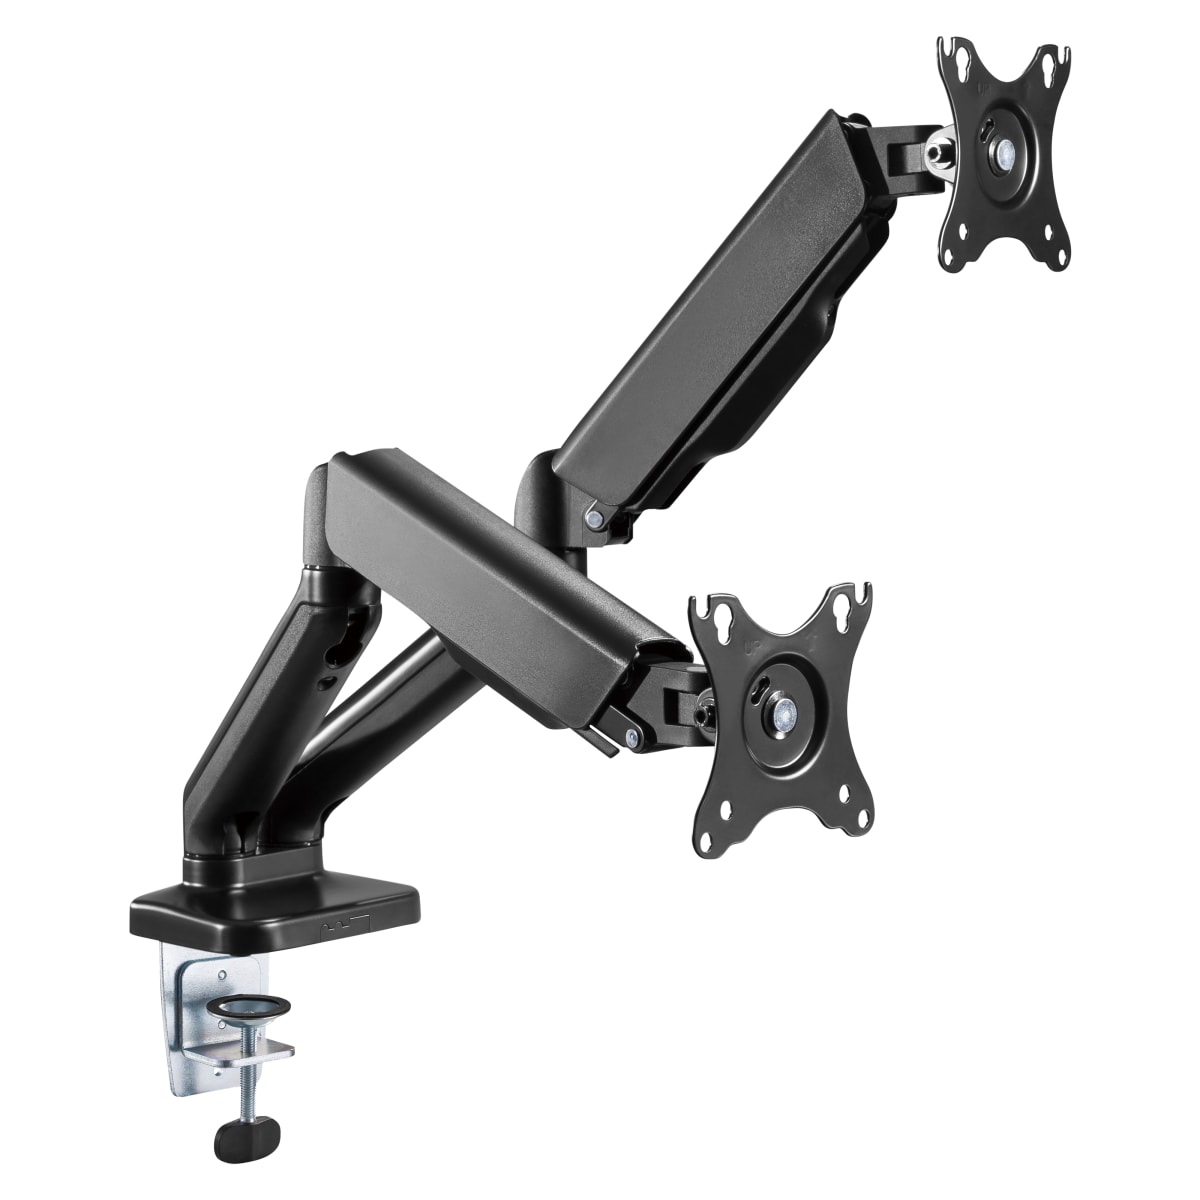 Double monitor articulated arm